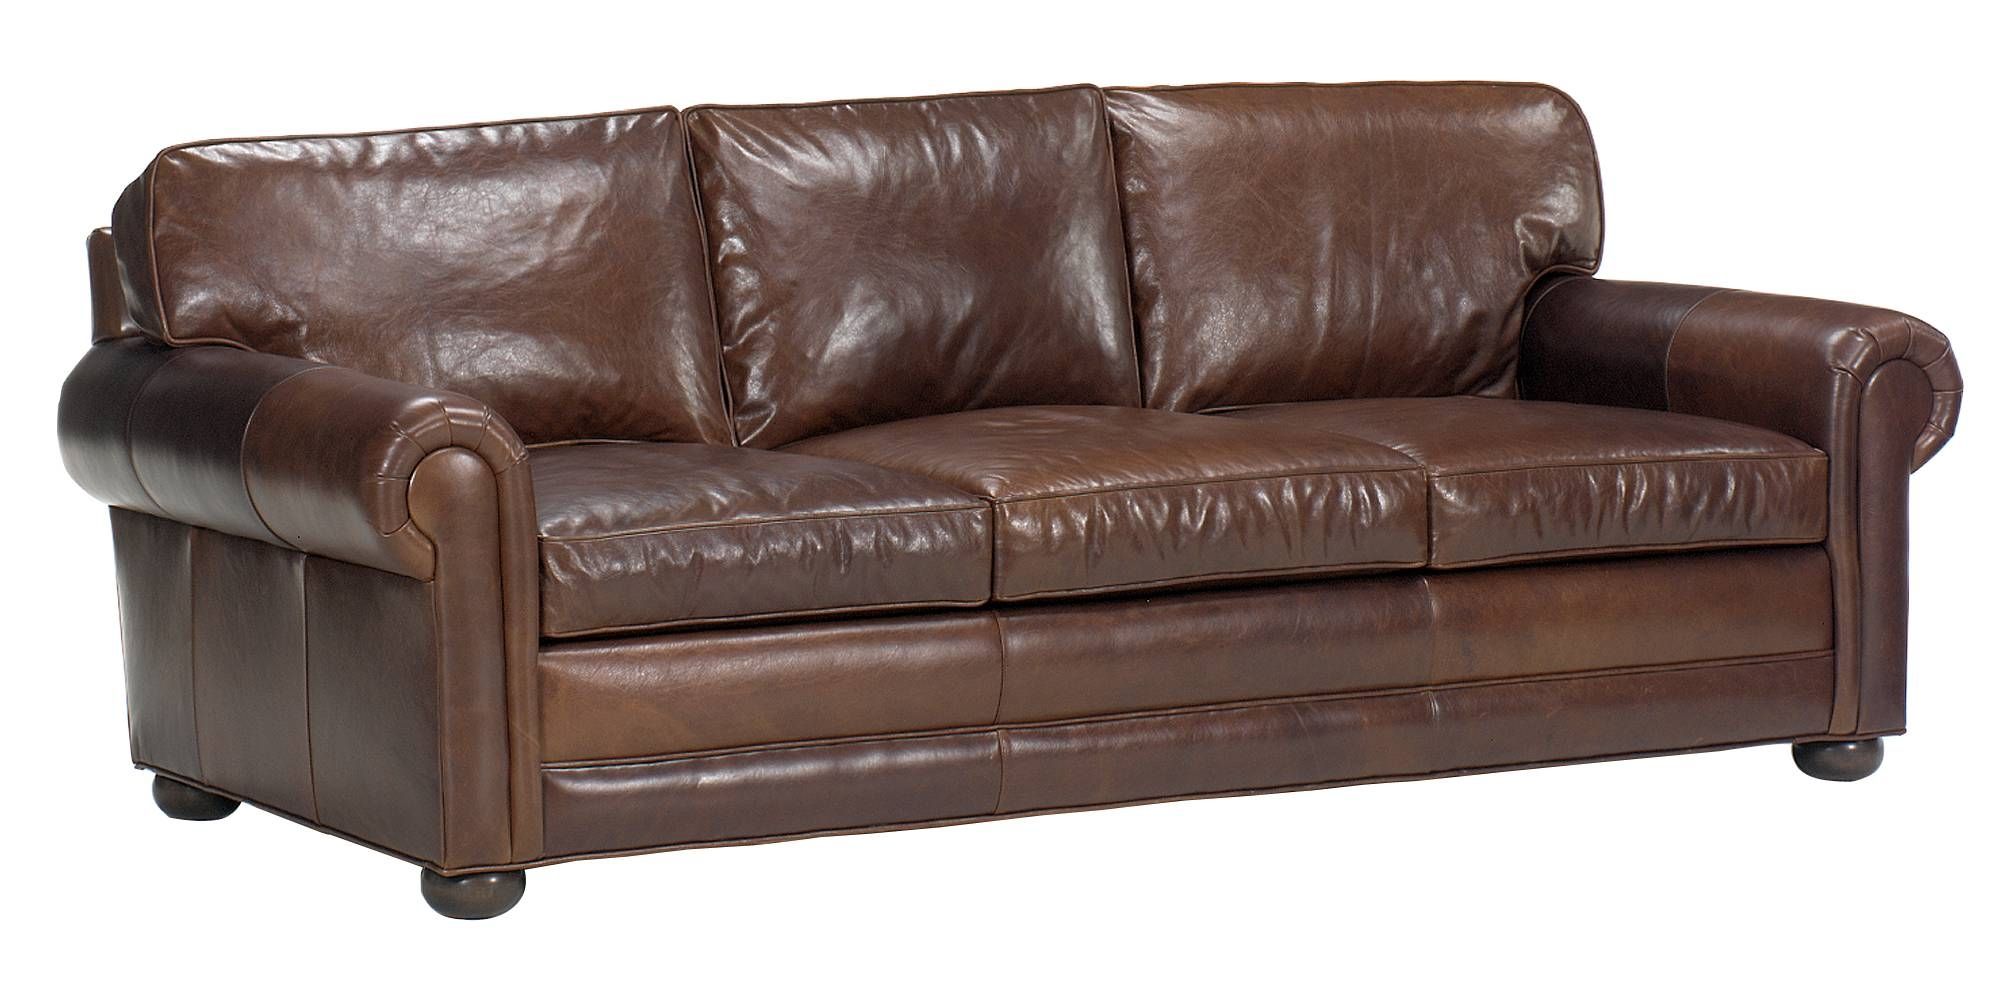 Oversized Large Deep Seated Leather Furniture | Club Furniture Regarding Wide Sofa Chairs (Photo 6 of 15)